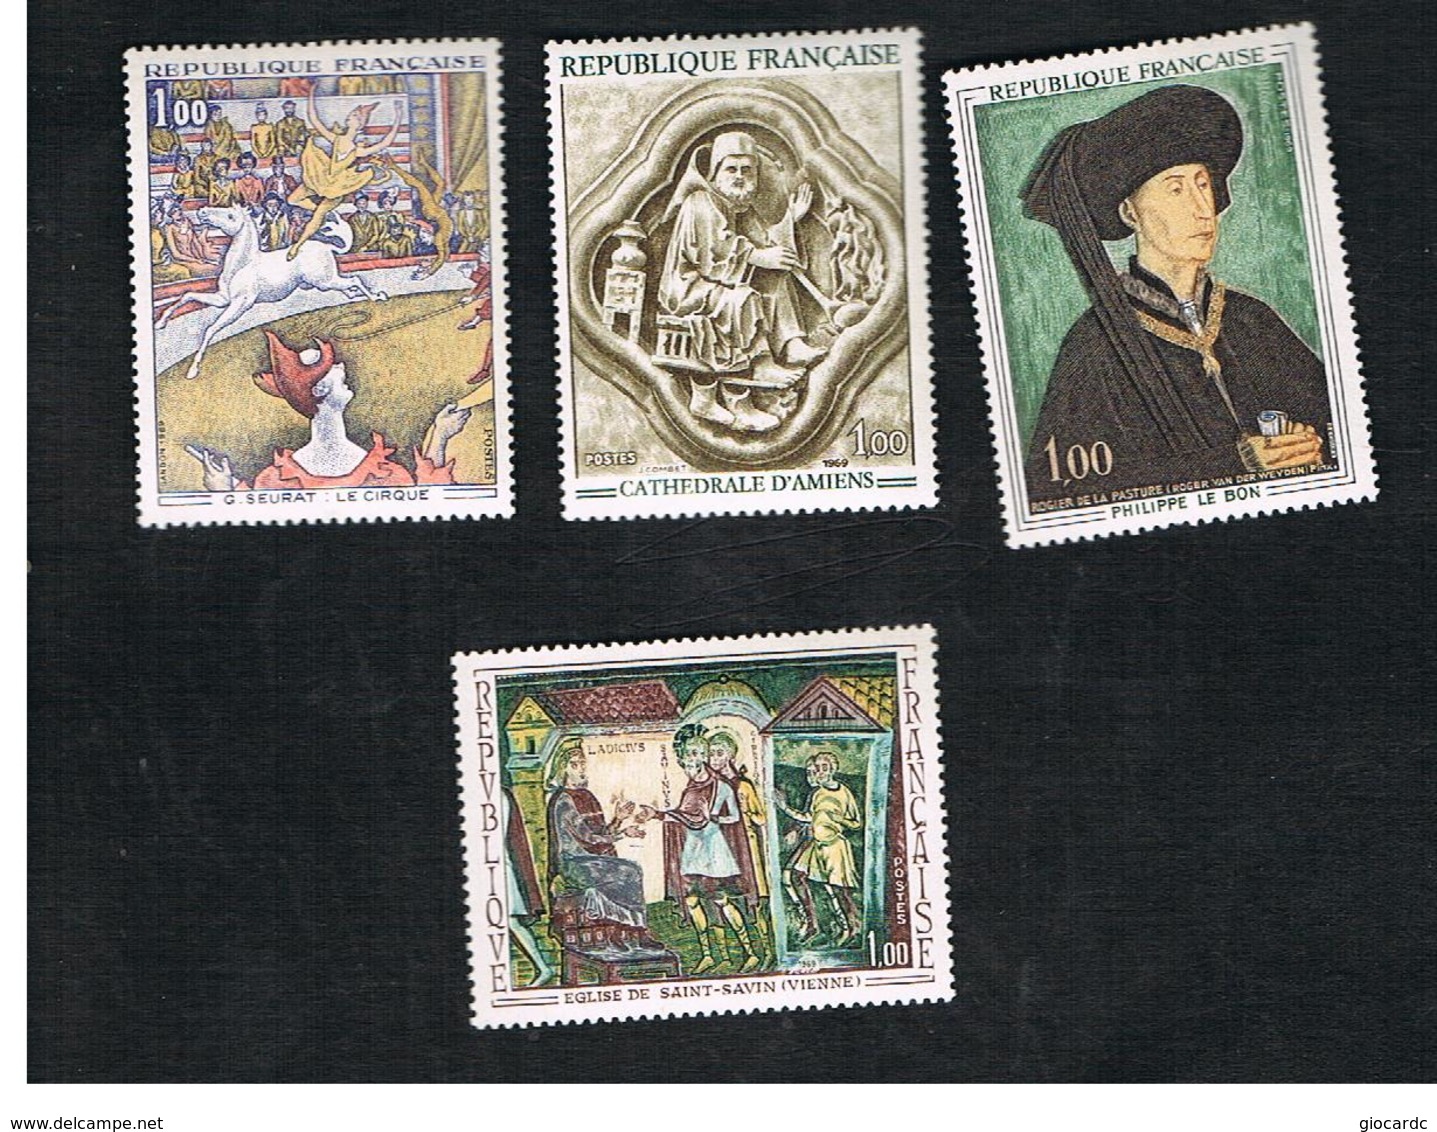 FRANCIA  (FRANCE) - SG 1819.1822  -  1969  FRENCH ART (COMPLET SET OF 4)        - MINT ** - Neufs